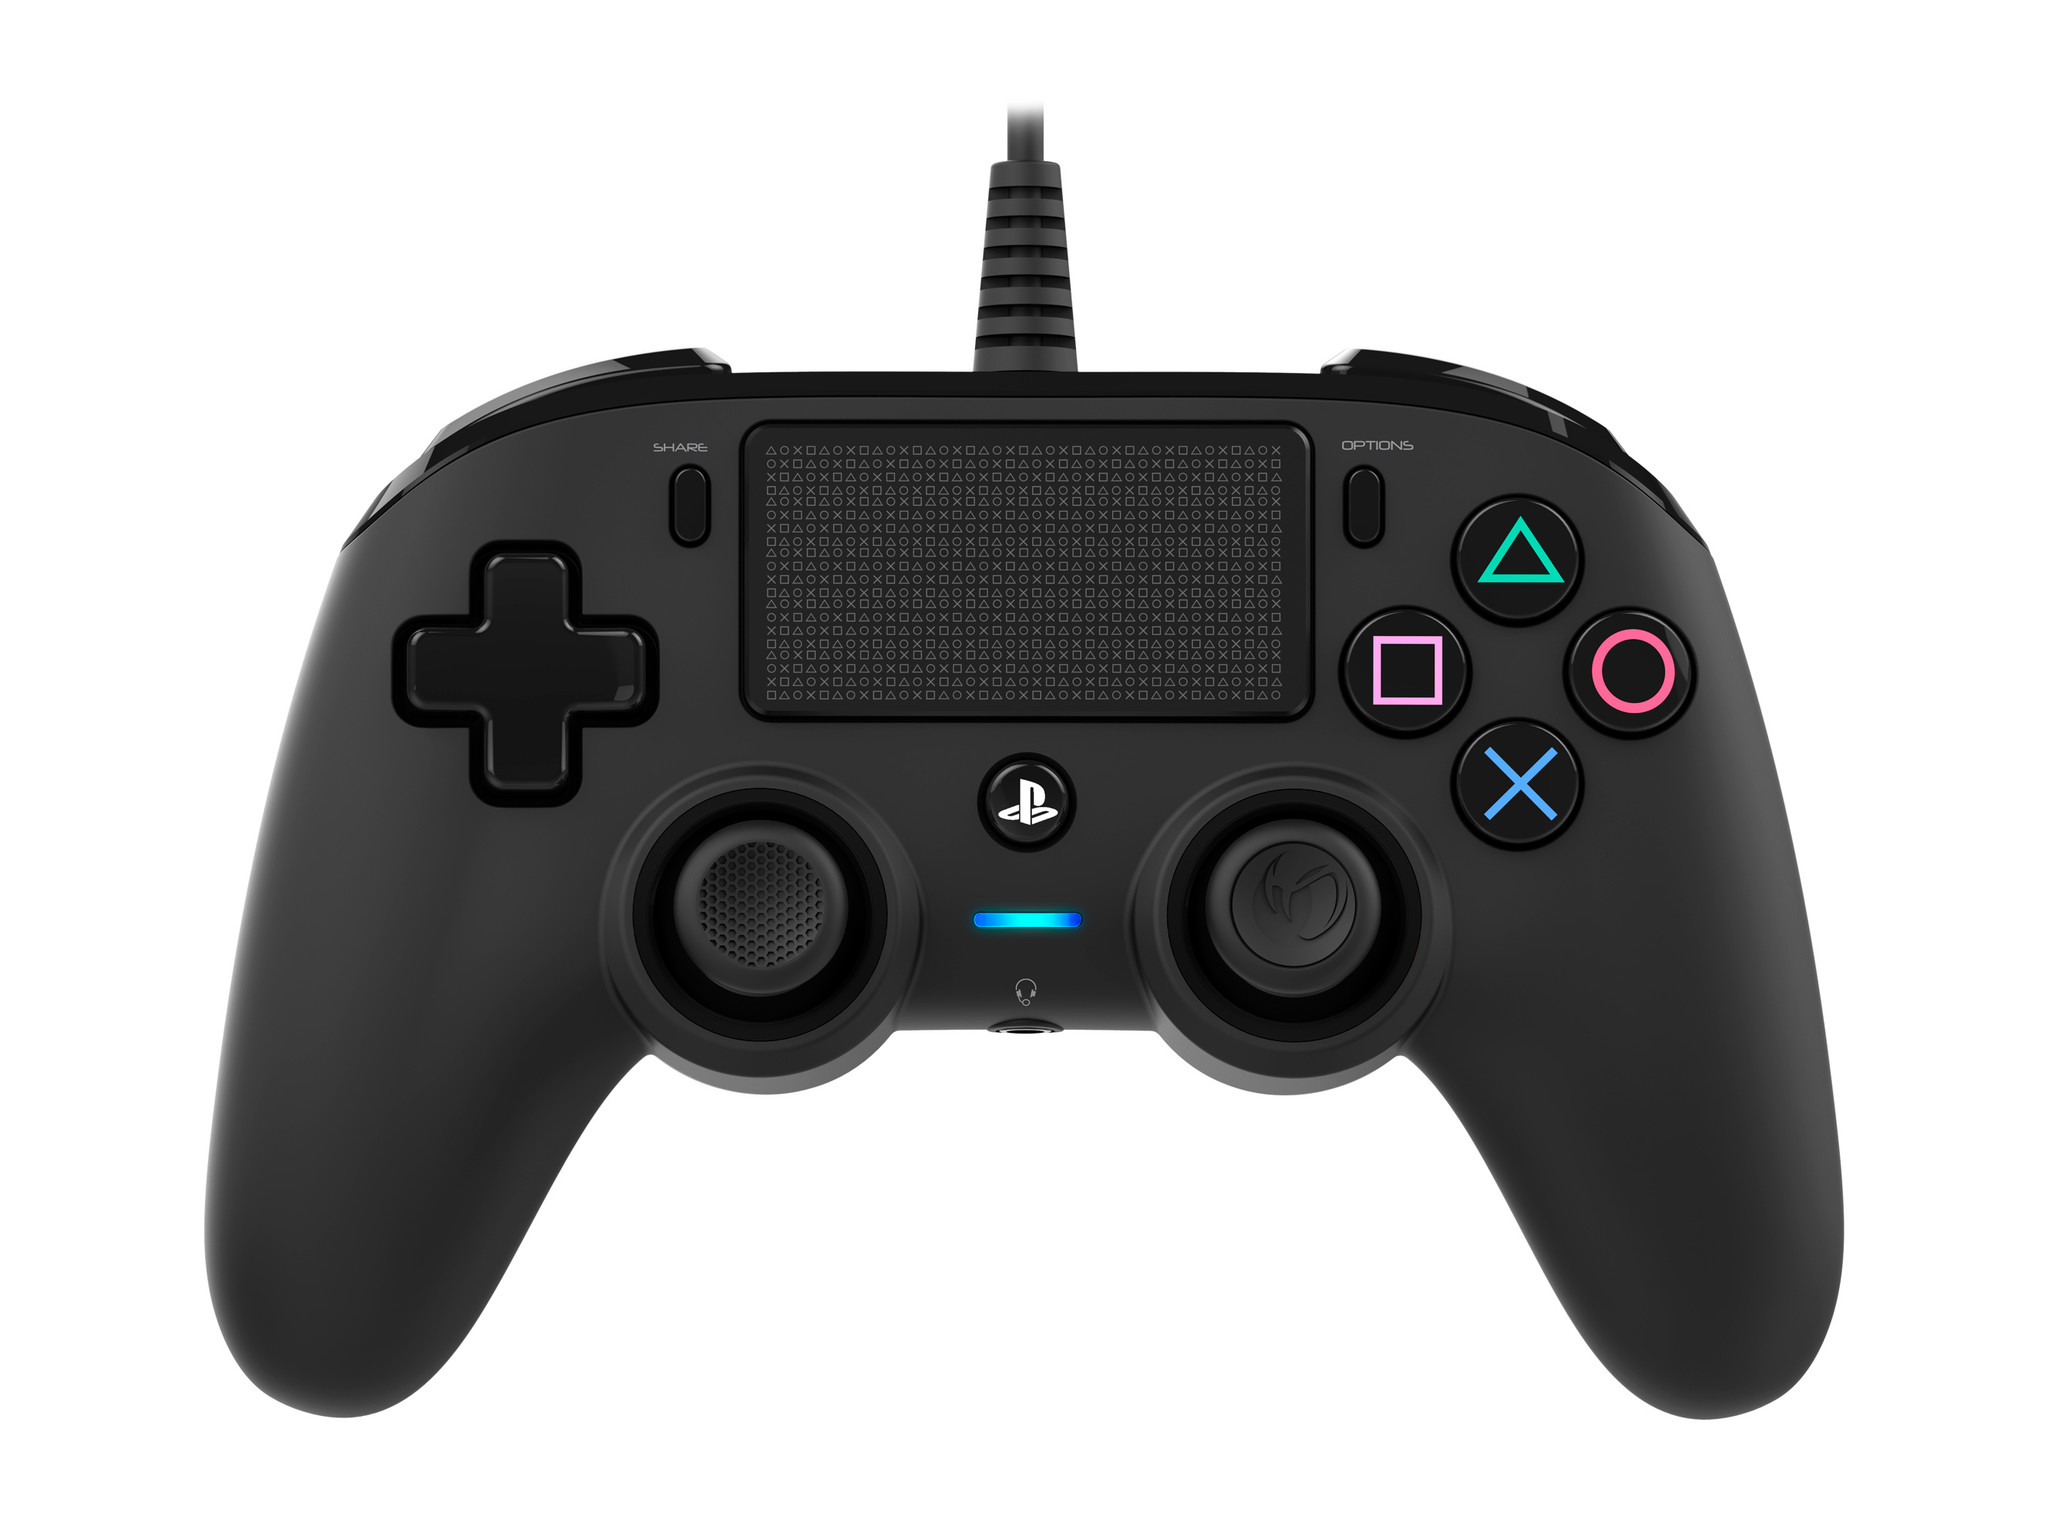 PS4 Nacon Wired Compact Licensed Controller kopen - AllYourGames.nl